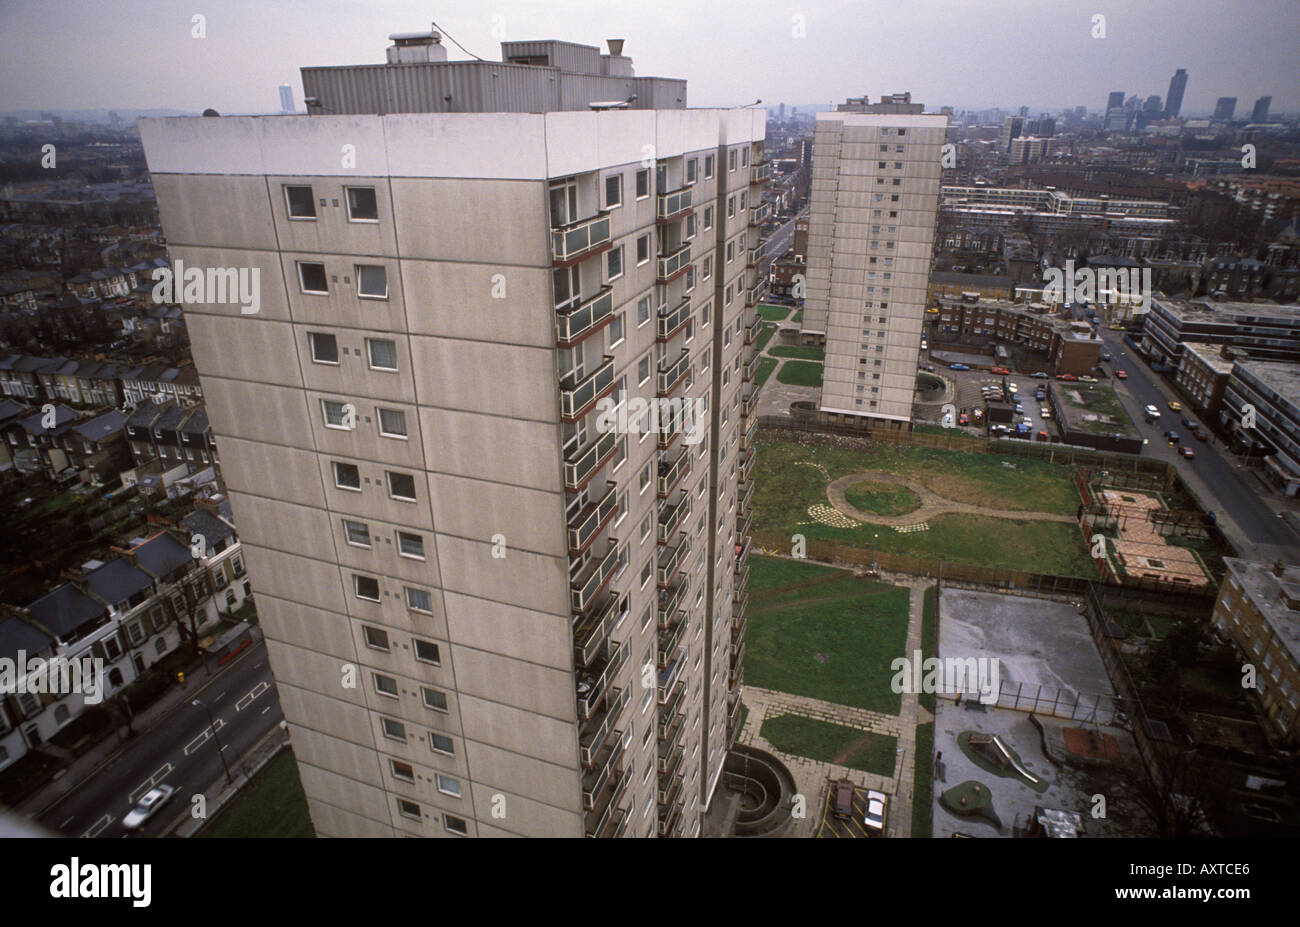 Working class housing high rise council flats view of London home subsidised local authority housing poor less well off Londoners 1990s UK HOMER SYKES Stock Photo